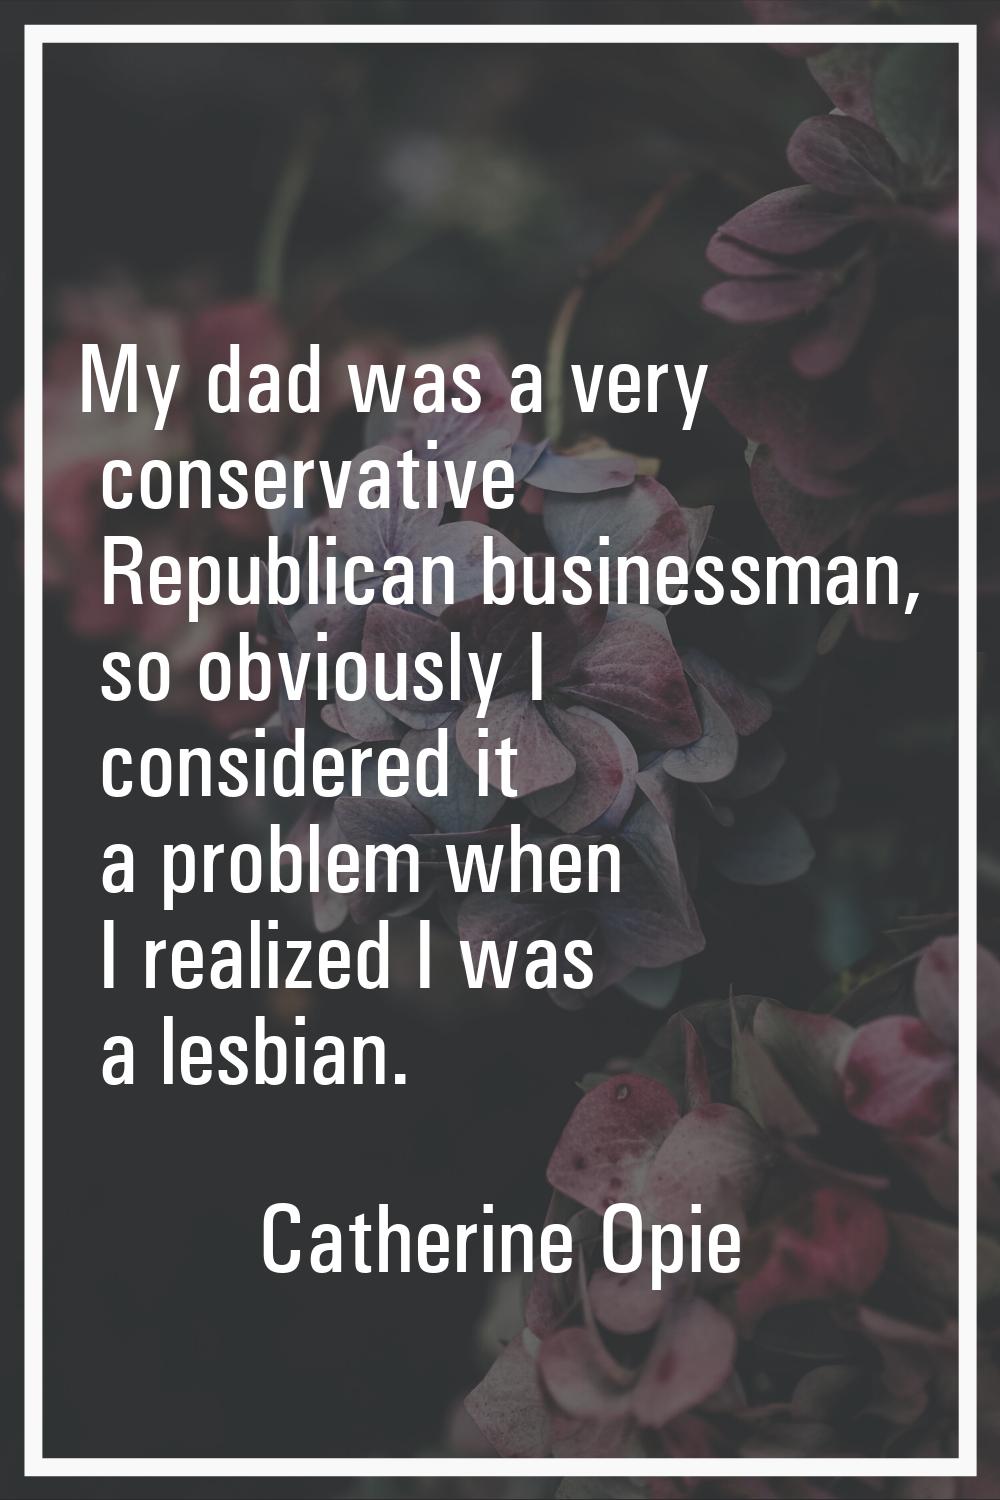 My dad was a very conservative Republican businessman, so obviously I considered it a problem when 